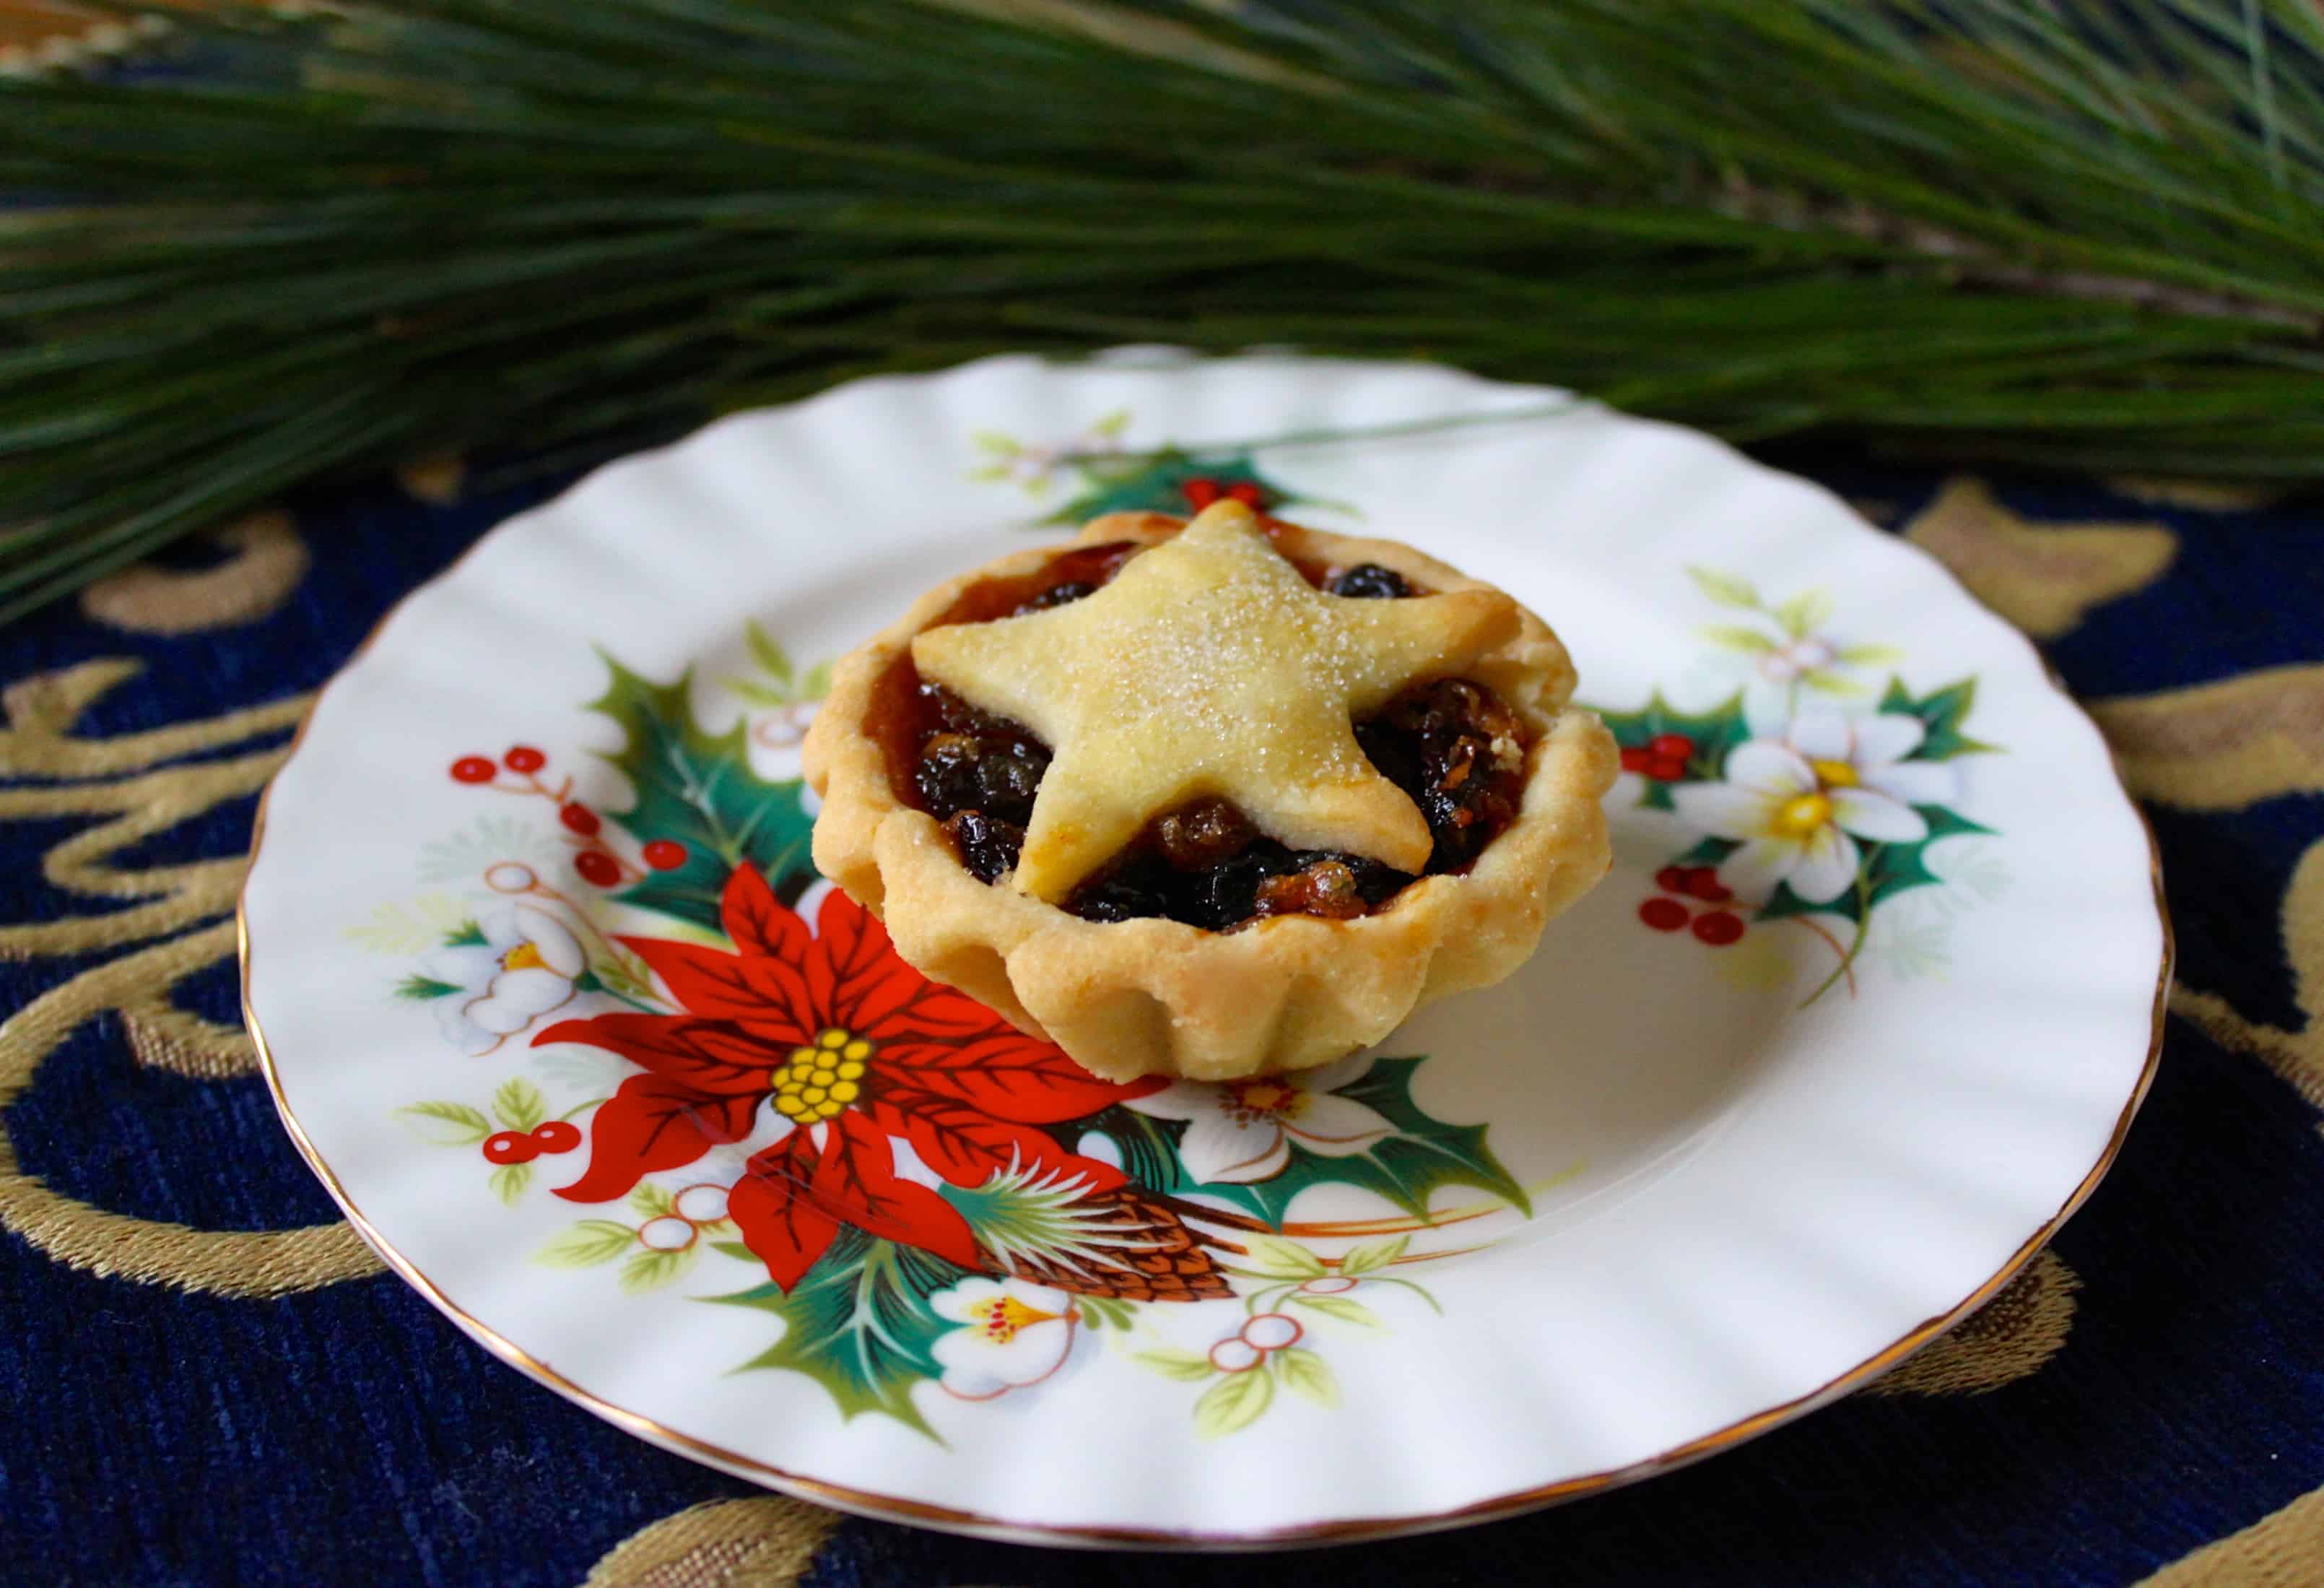 Mince Pies (Mincemeat) Pies for a Traditional British Christmas Treat ...